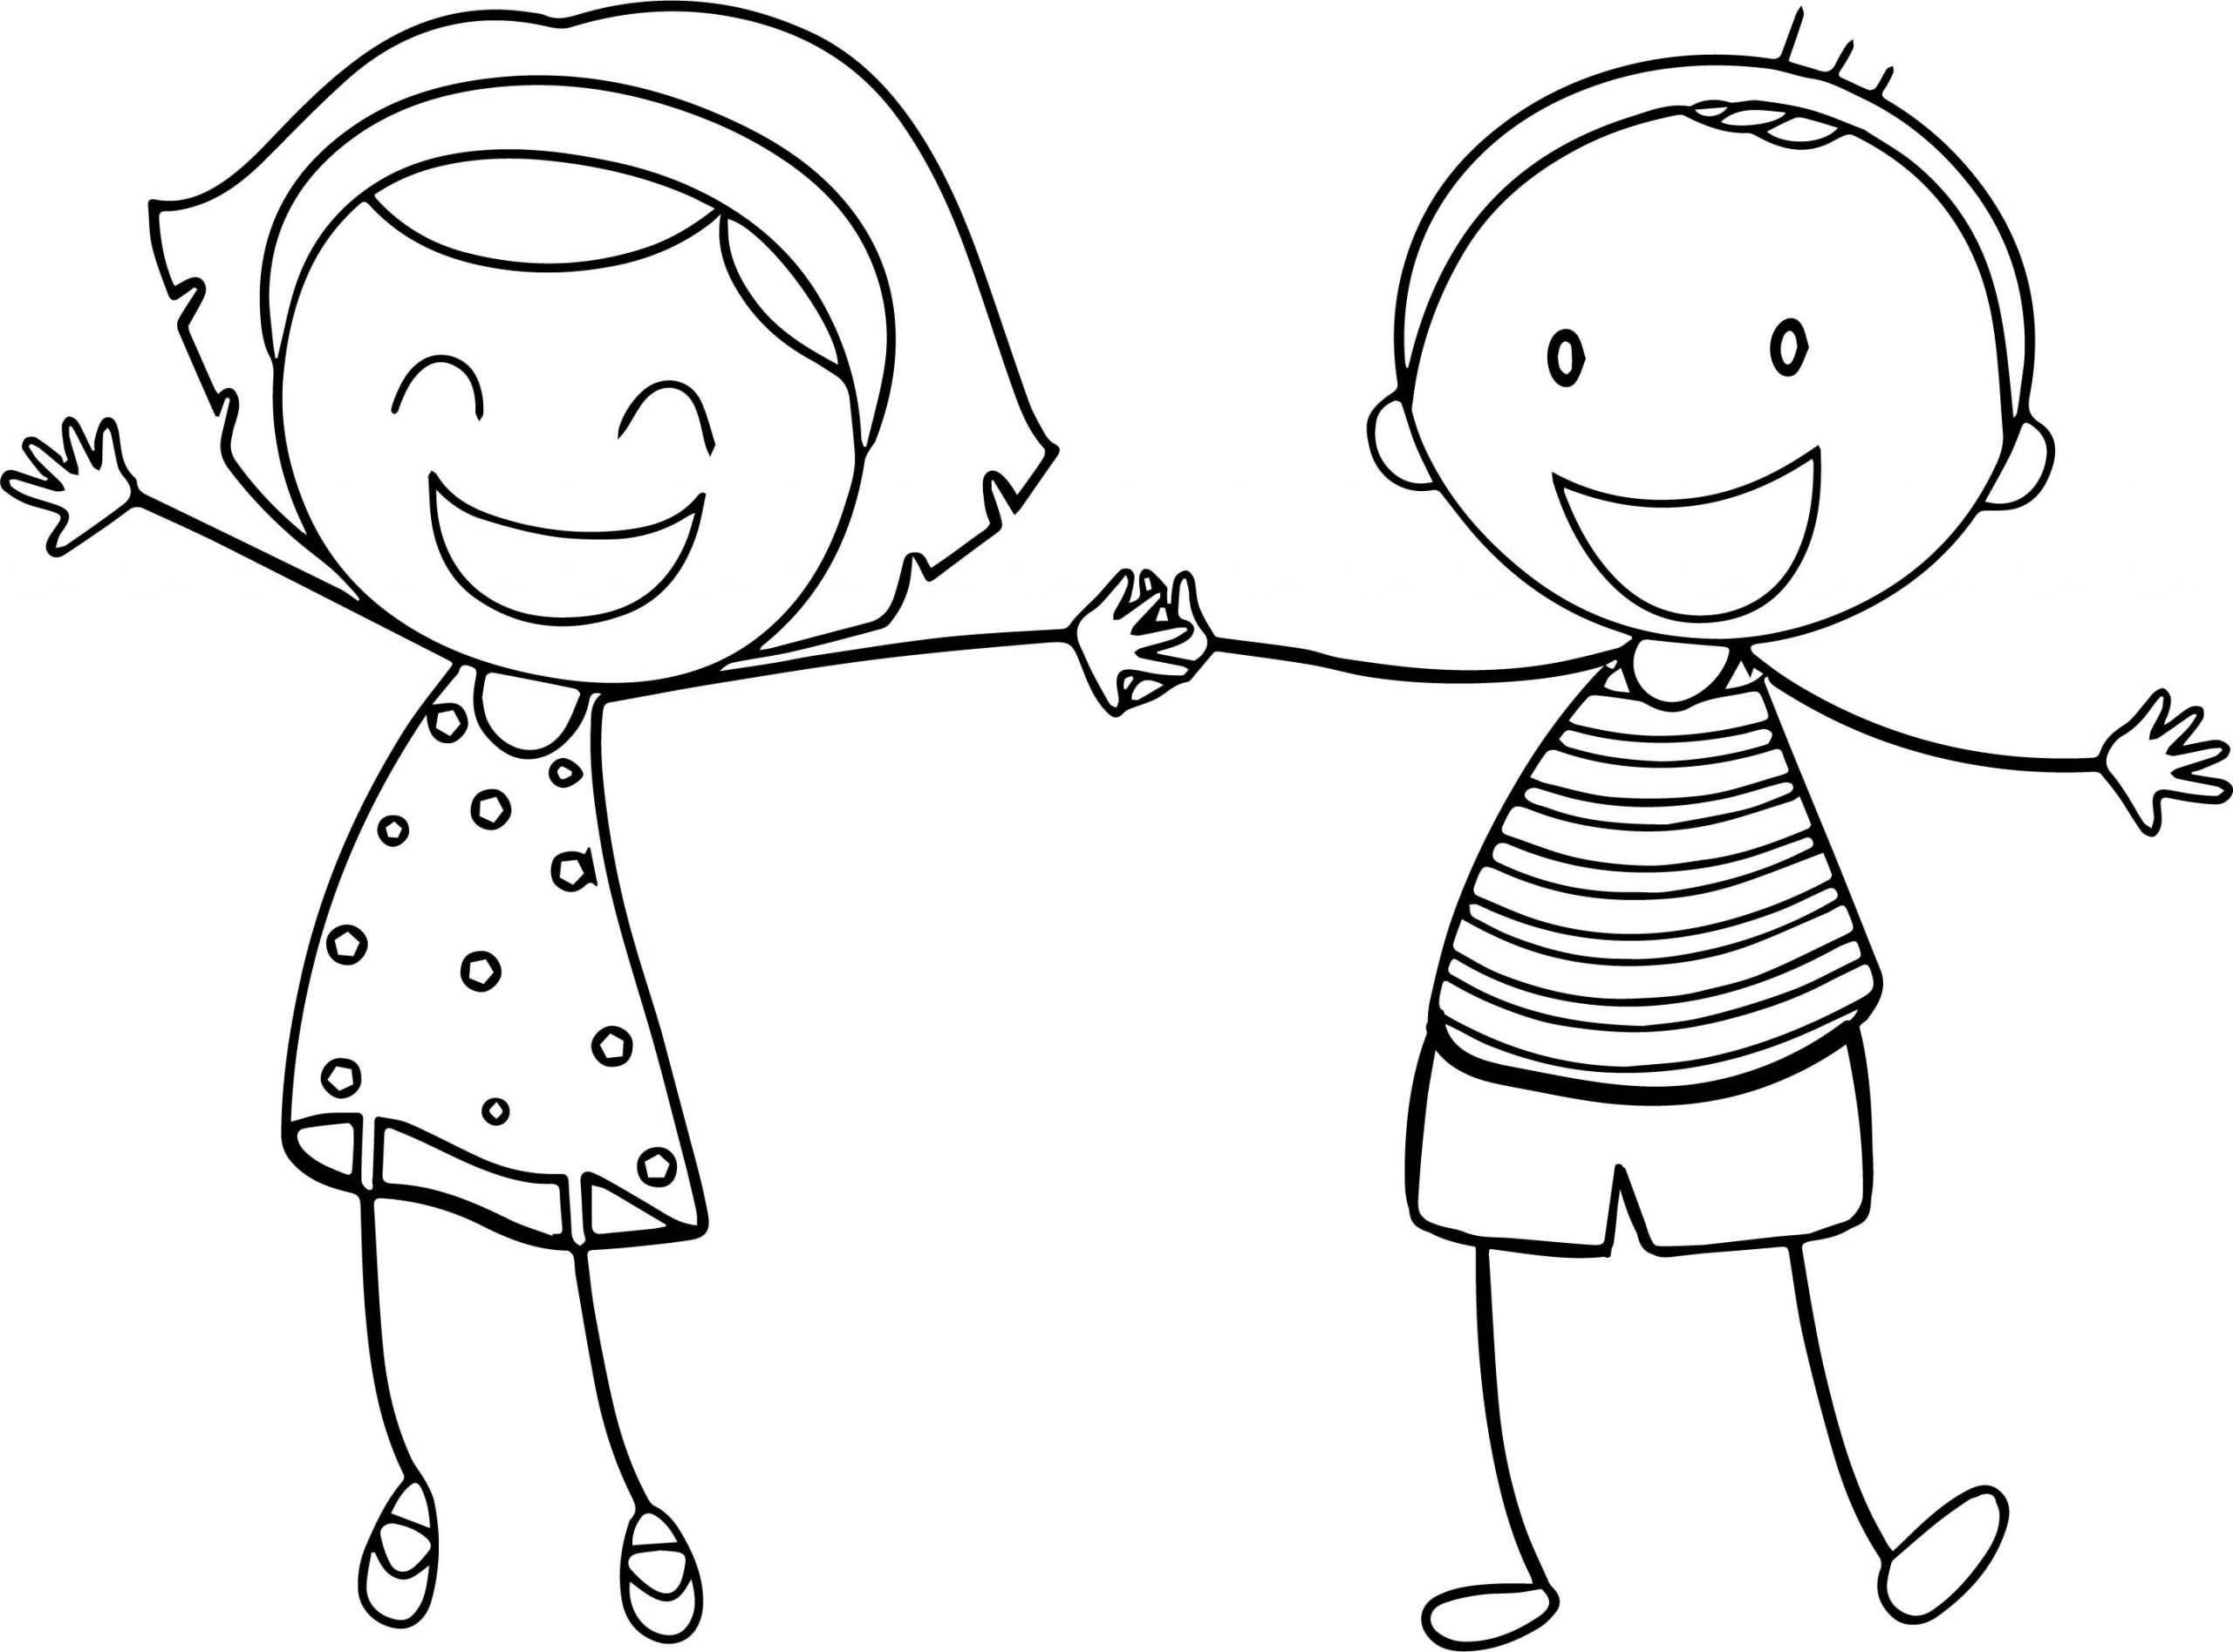 Boys And Girls Coloring Pages
 Basic Funny Boy Girl Coloring Sheet Printable Free Pages